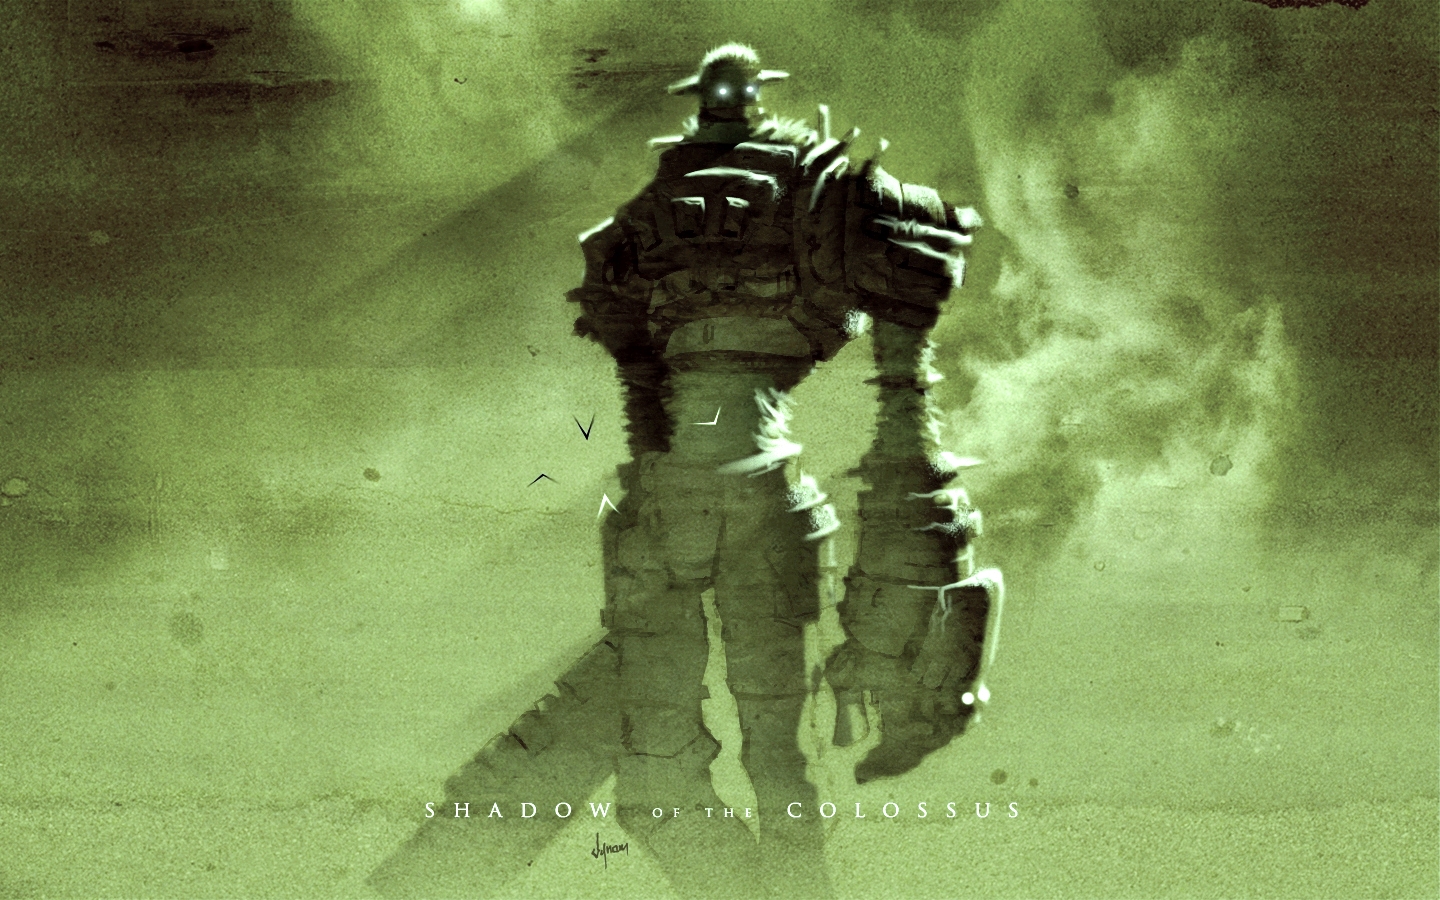 General 1440x900 Shadow of the Colossus artwork fantasy art video games video game art